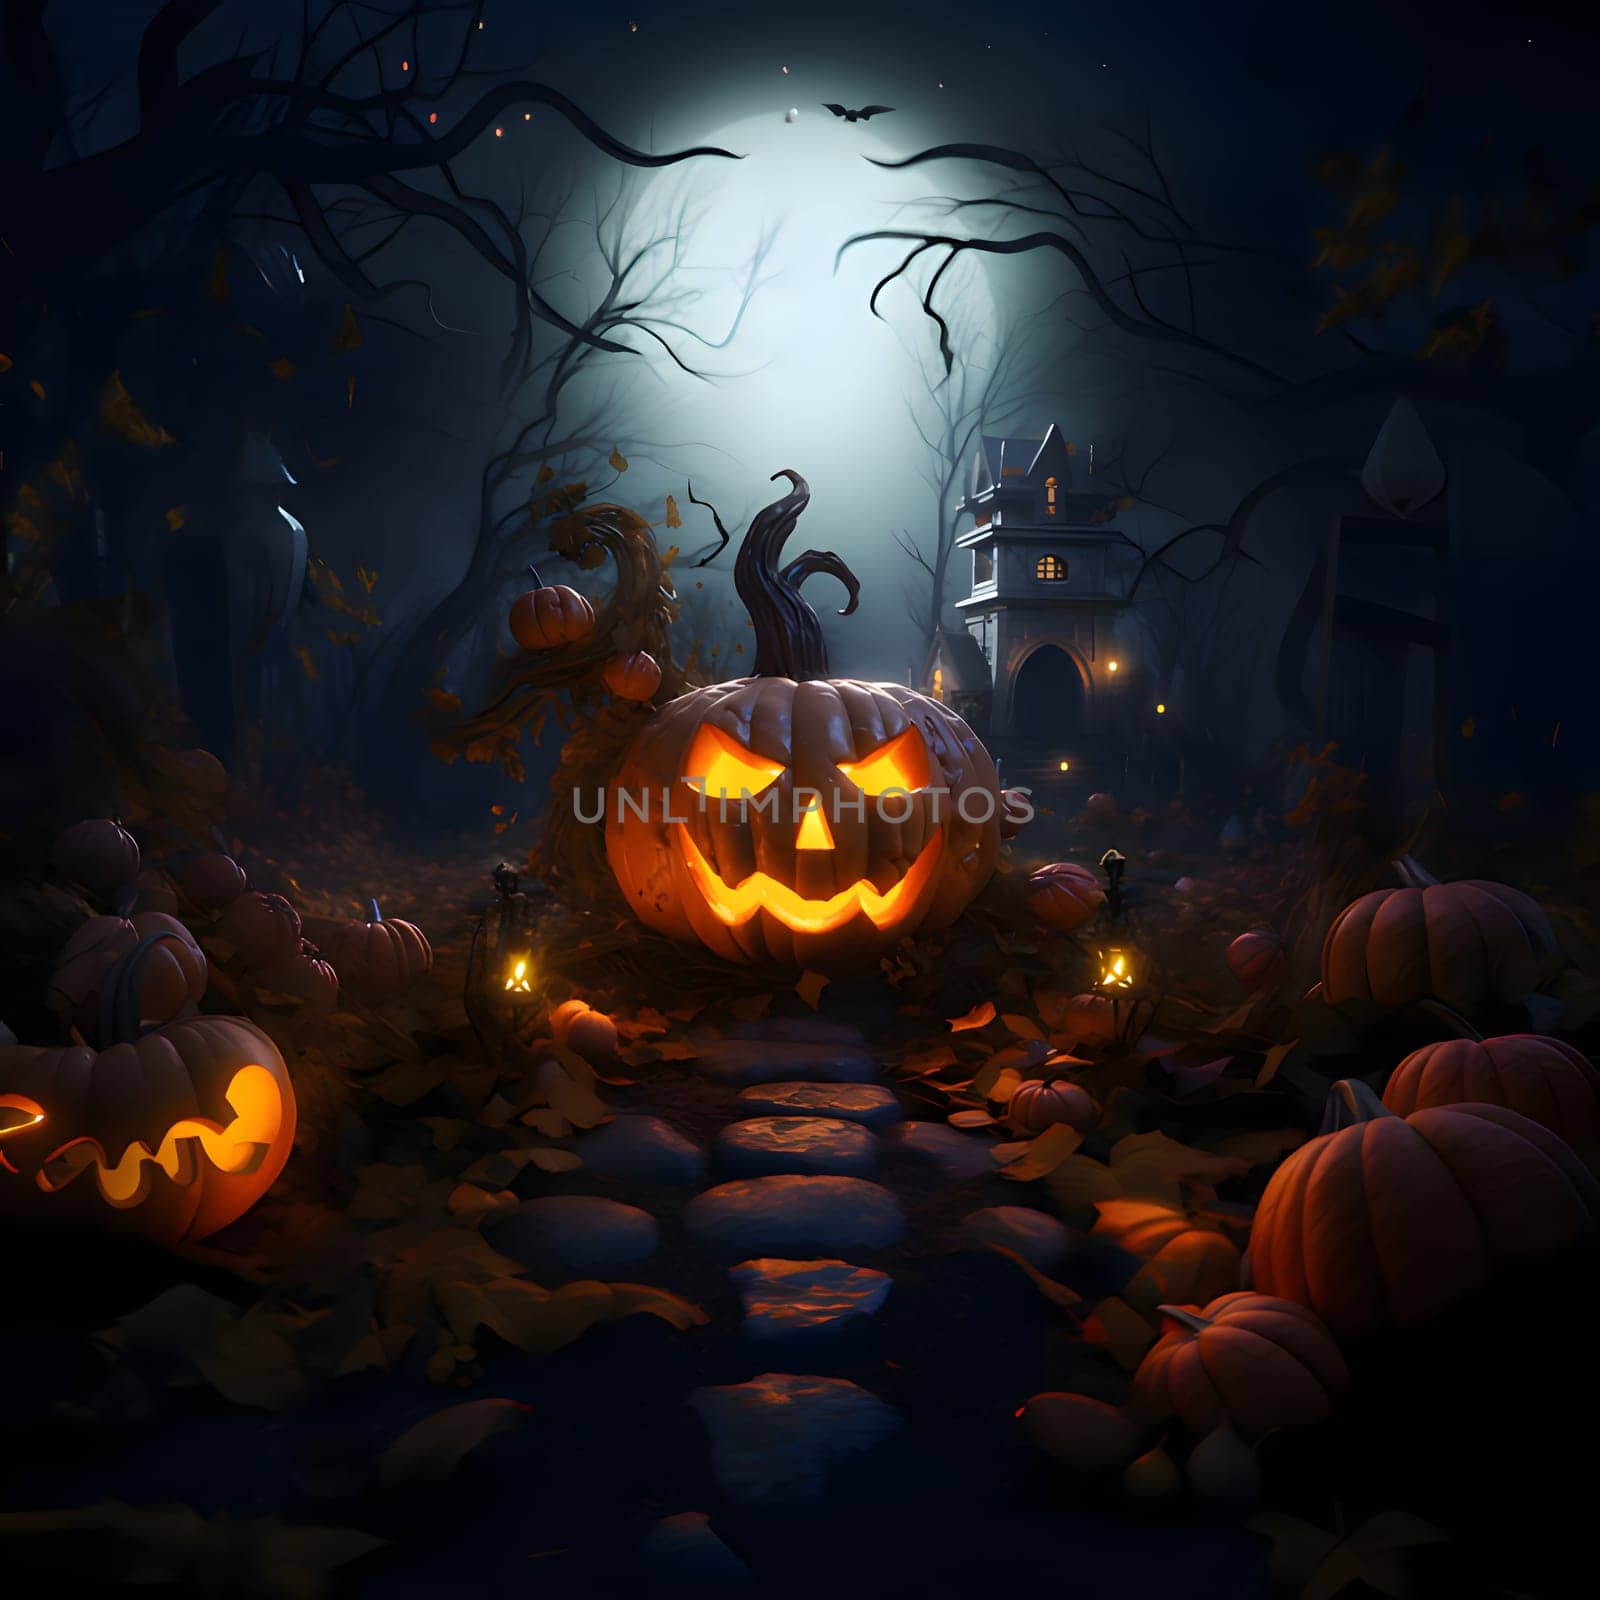 Glowing jack-o-lantern pumpkin entwined with thorns around leaves in a dark forest, a Halloween image. Atmosphere of darkness and fear.